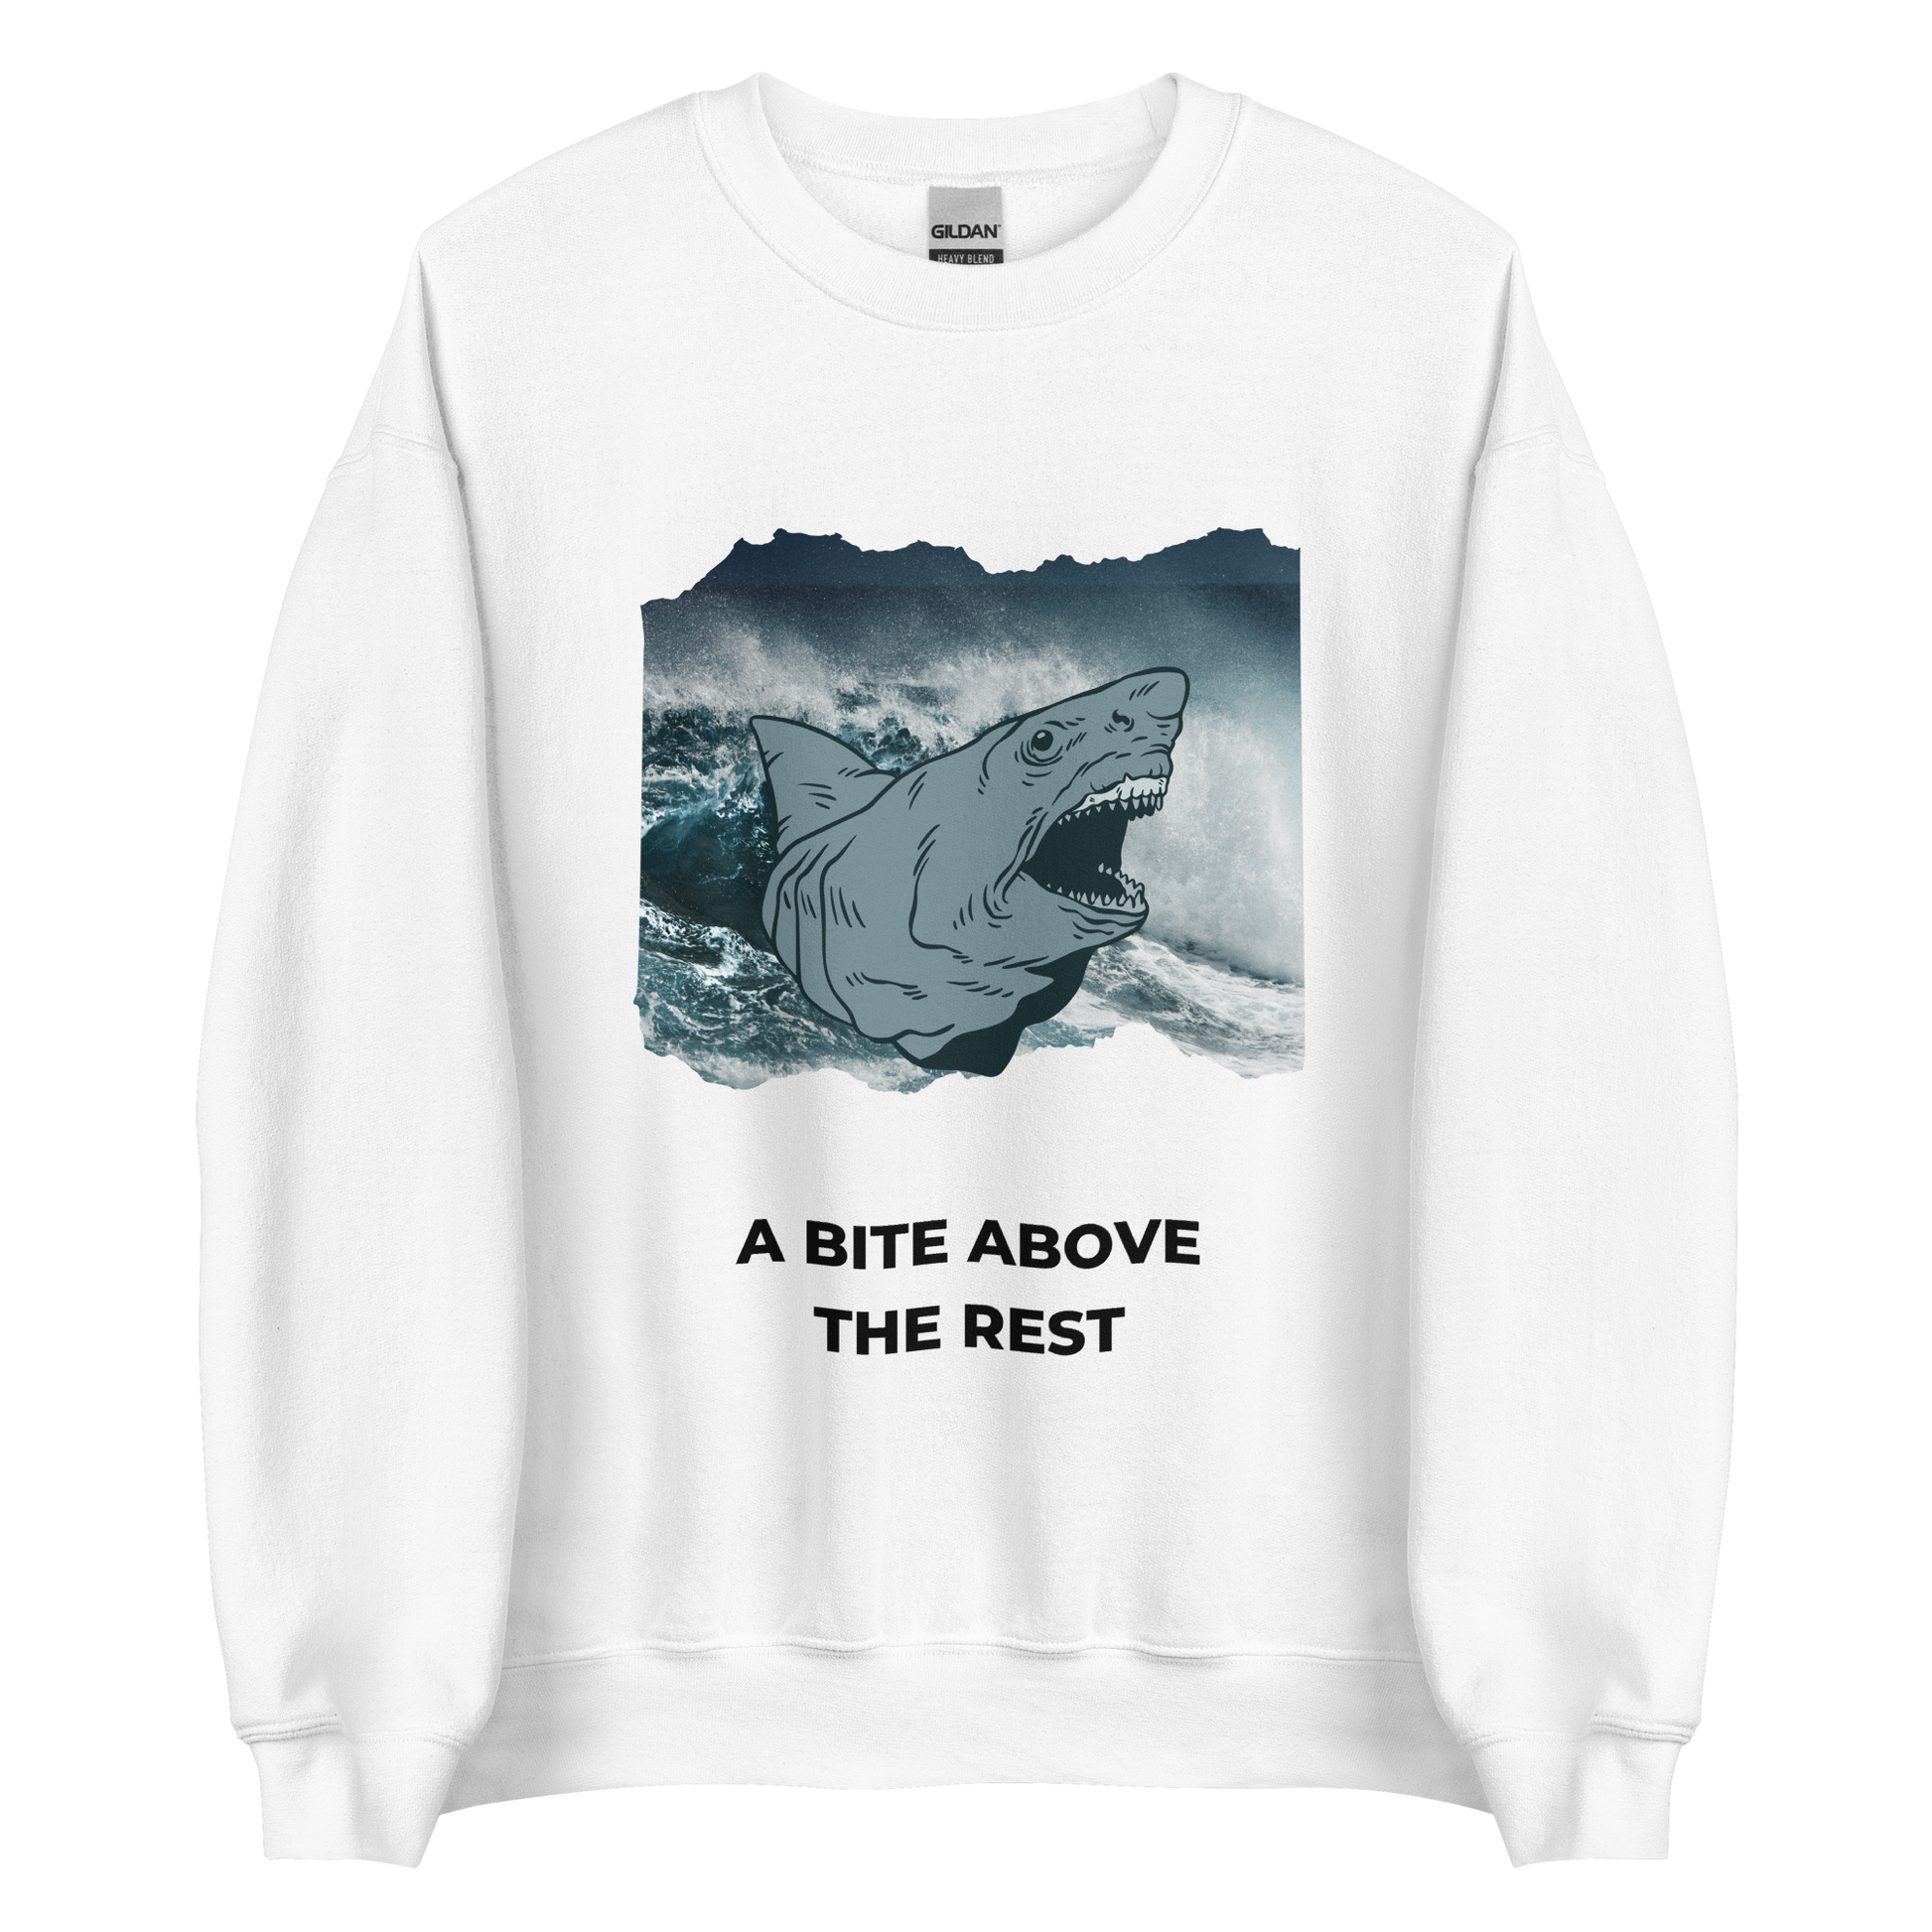 White Megalodon Sweatshirt featuring the 'A Bite Above the Rest' graphic on the chest - Funny Graphic Megalodon Sweatshirts - Boozy Fox